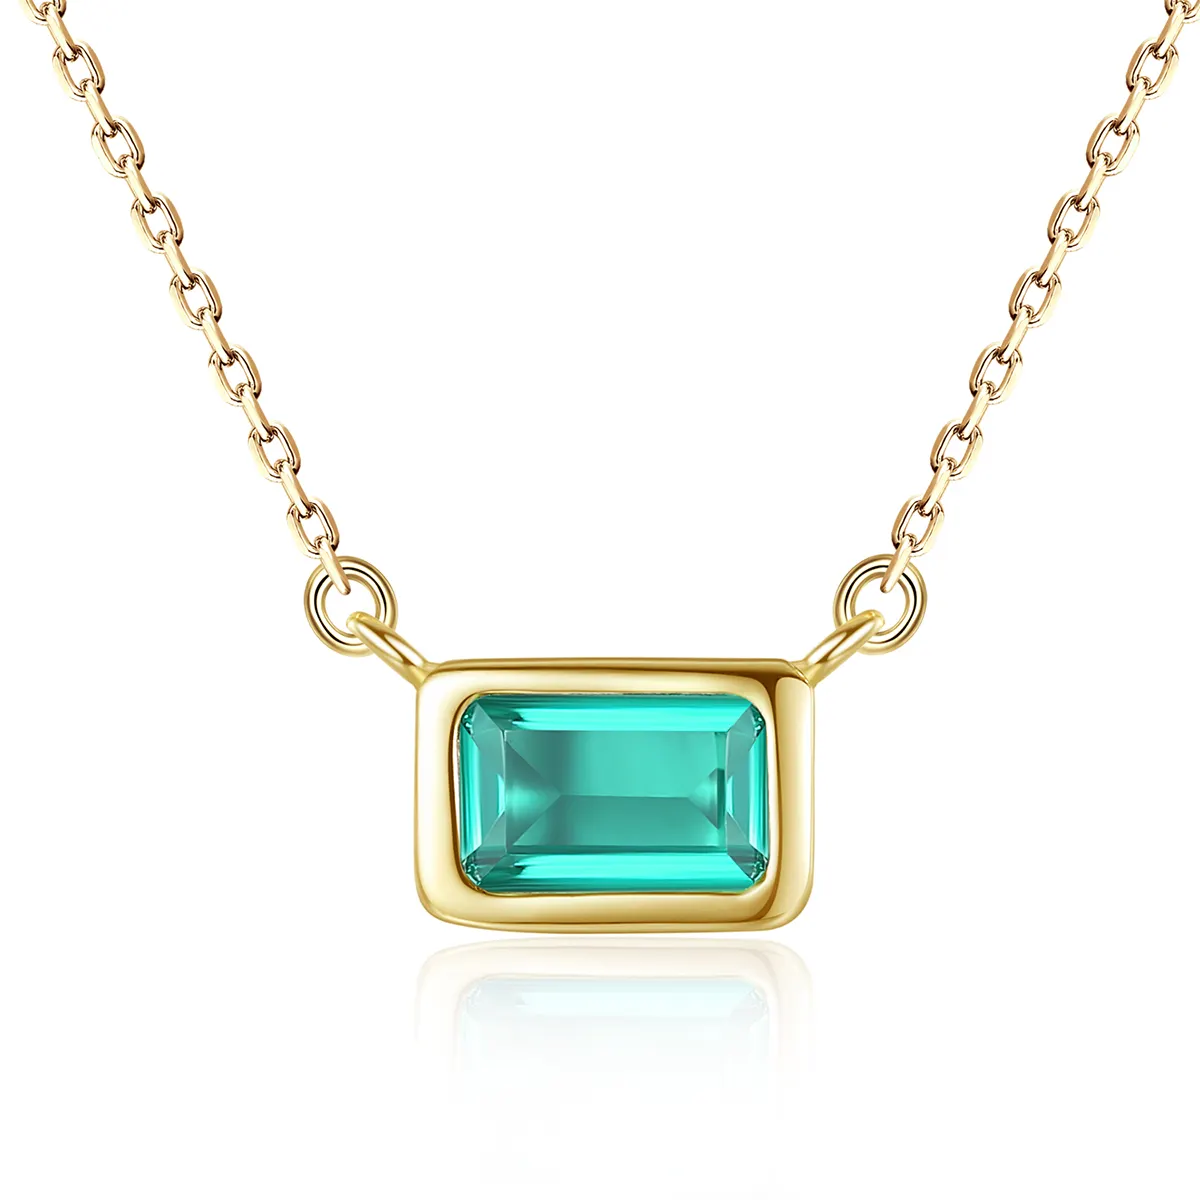 CZCITY Women 925 Sterling Silver Gold Plated Chain Link Design Necklace with Sky Blue Square Pendant Jewelry